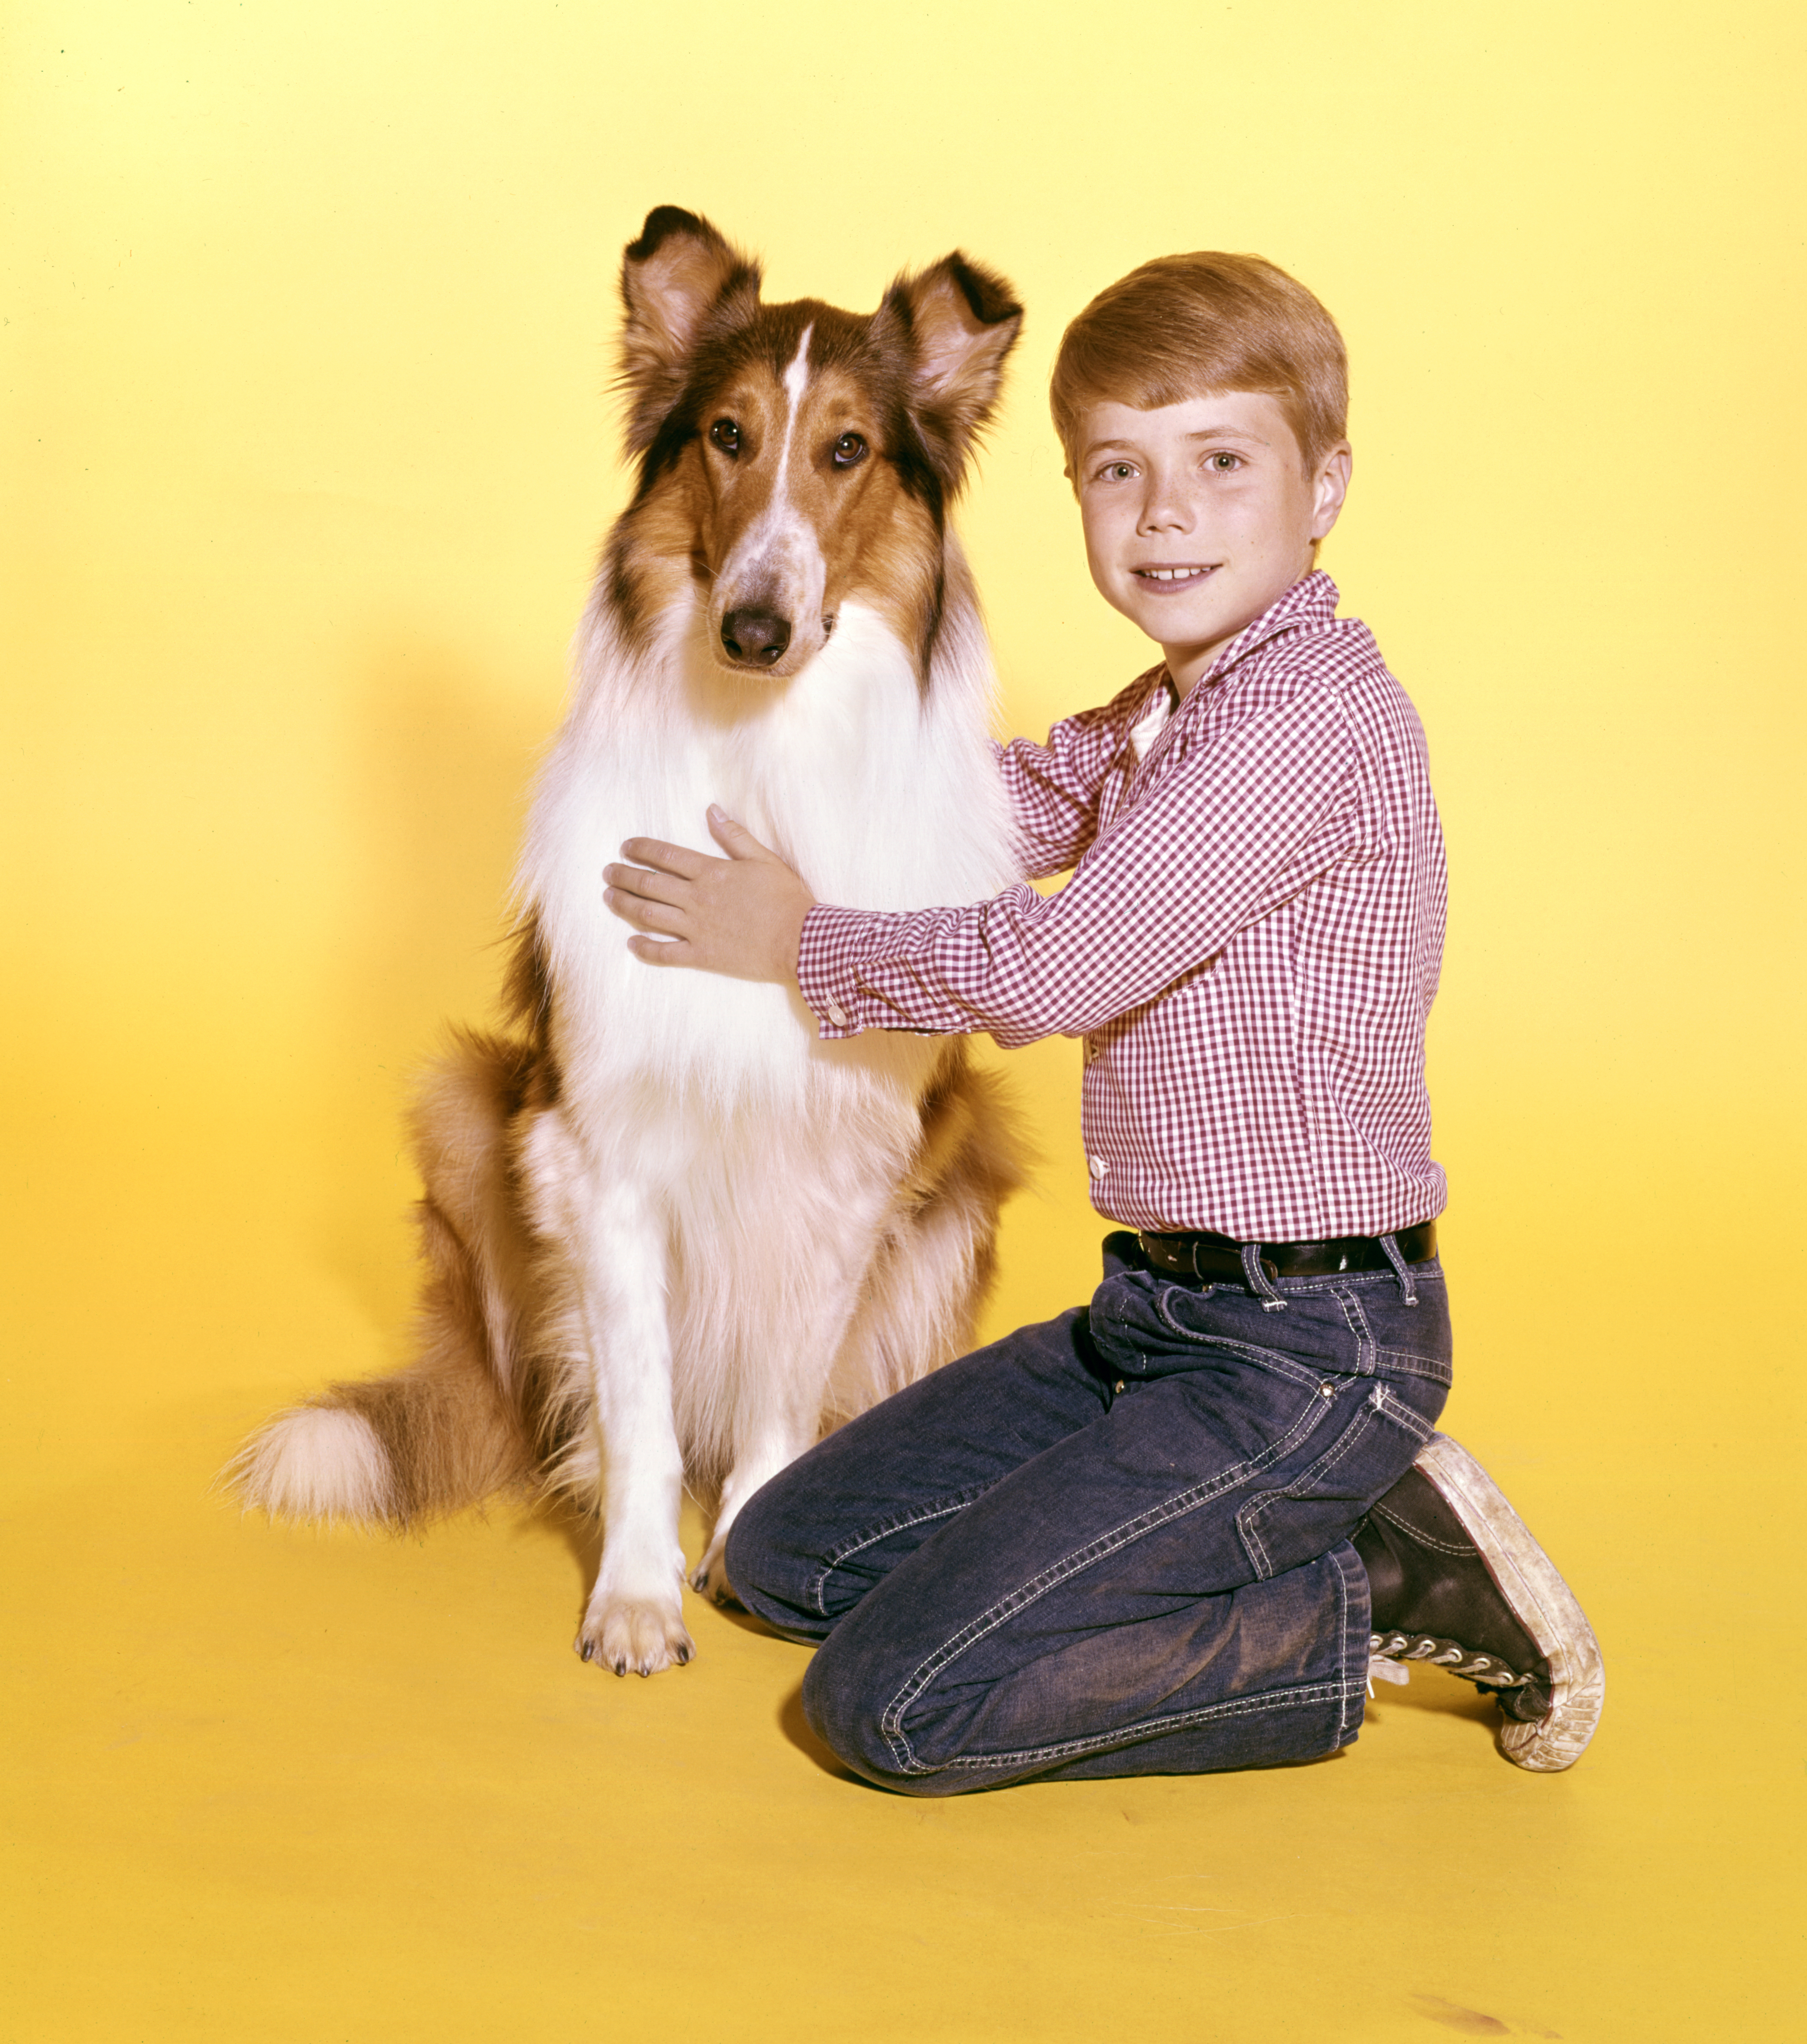 Jon Provost on "Lassie in 1964 | Source: Getty Images